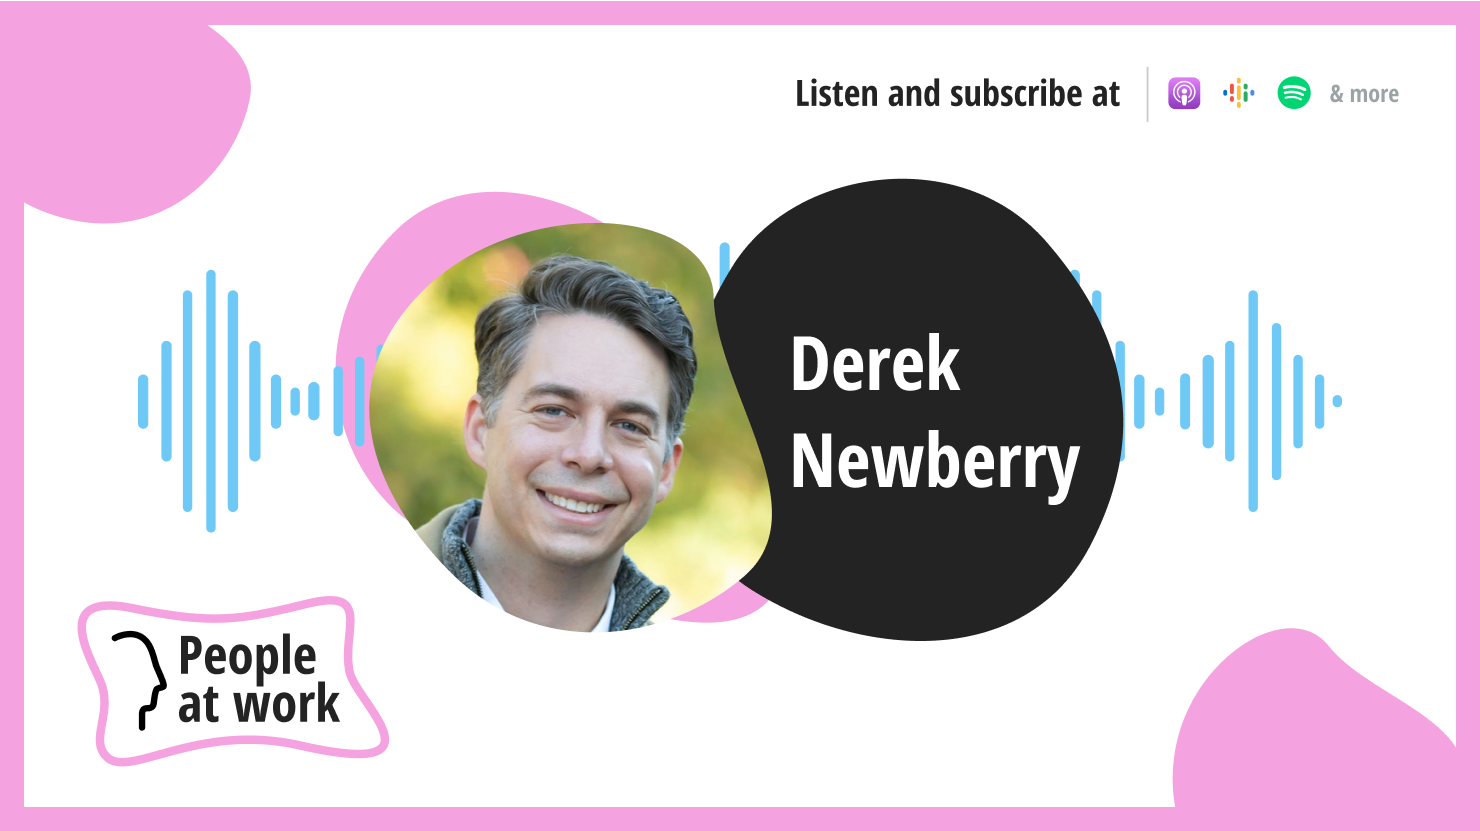 From invisible to visible leadership with Derek Newberry